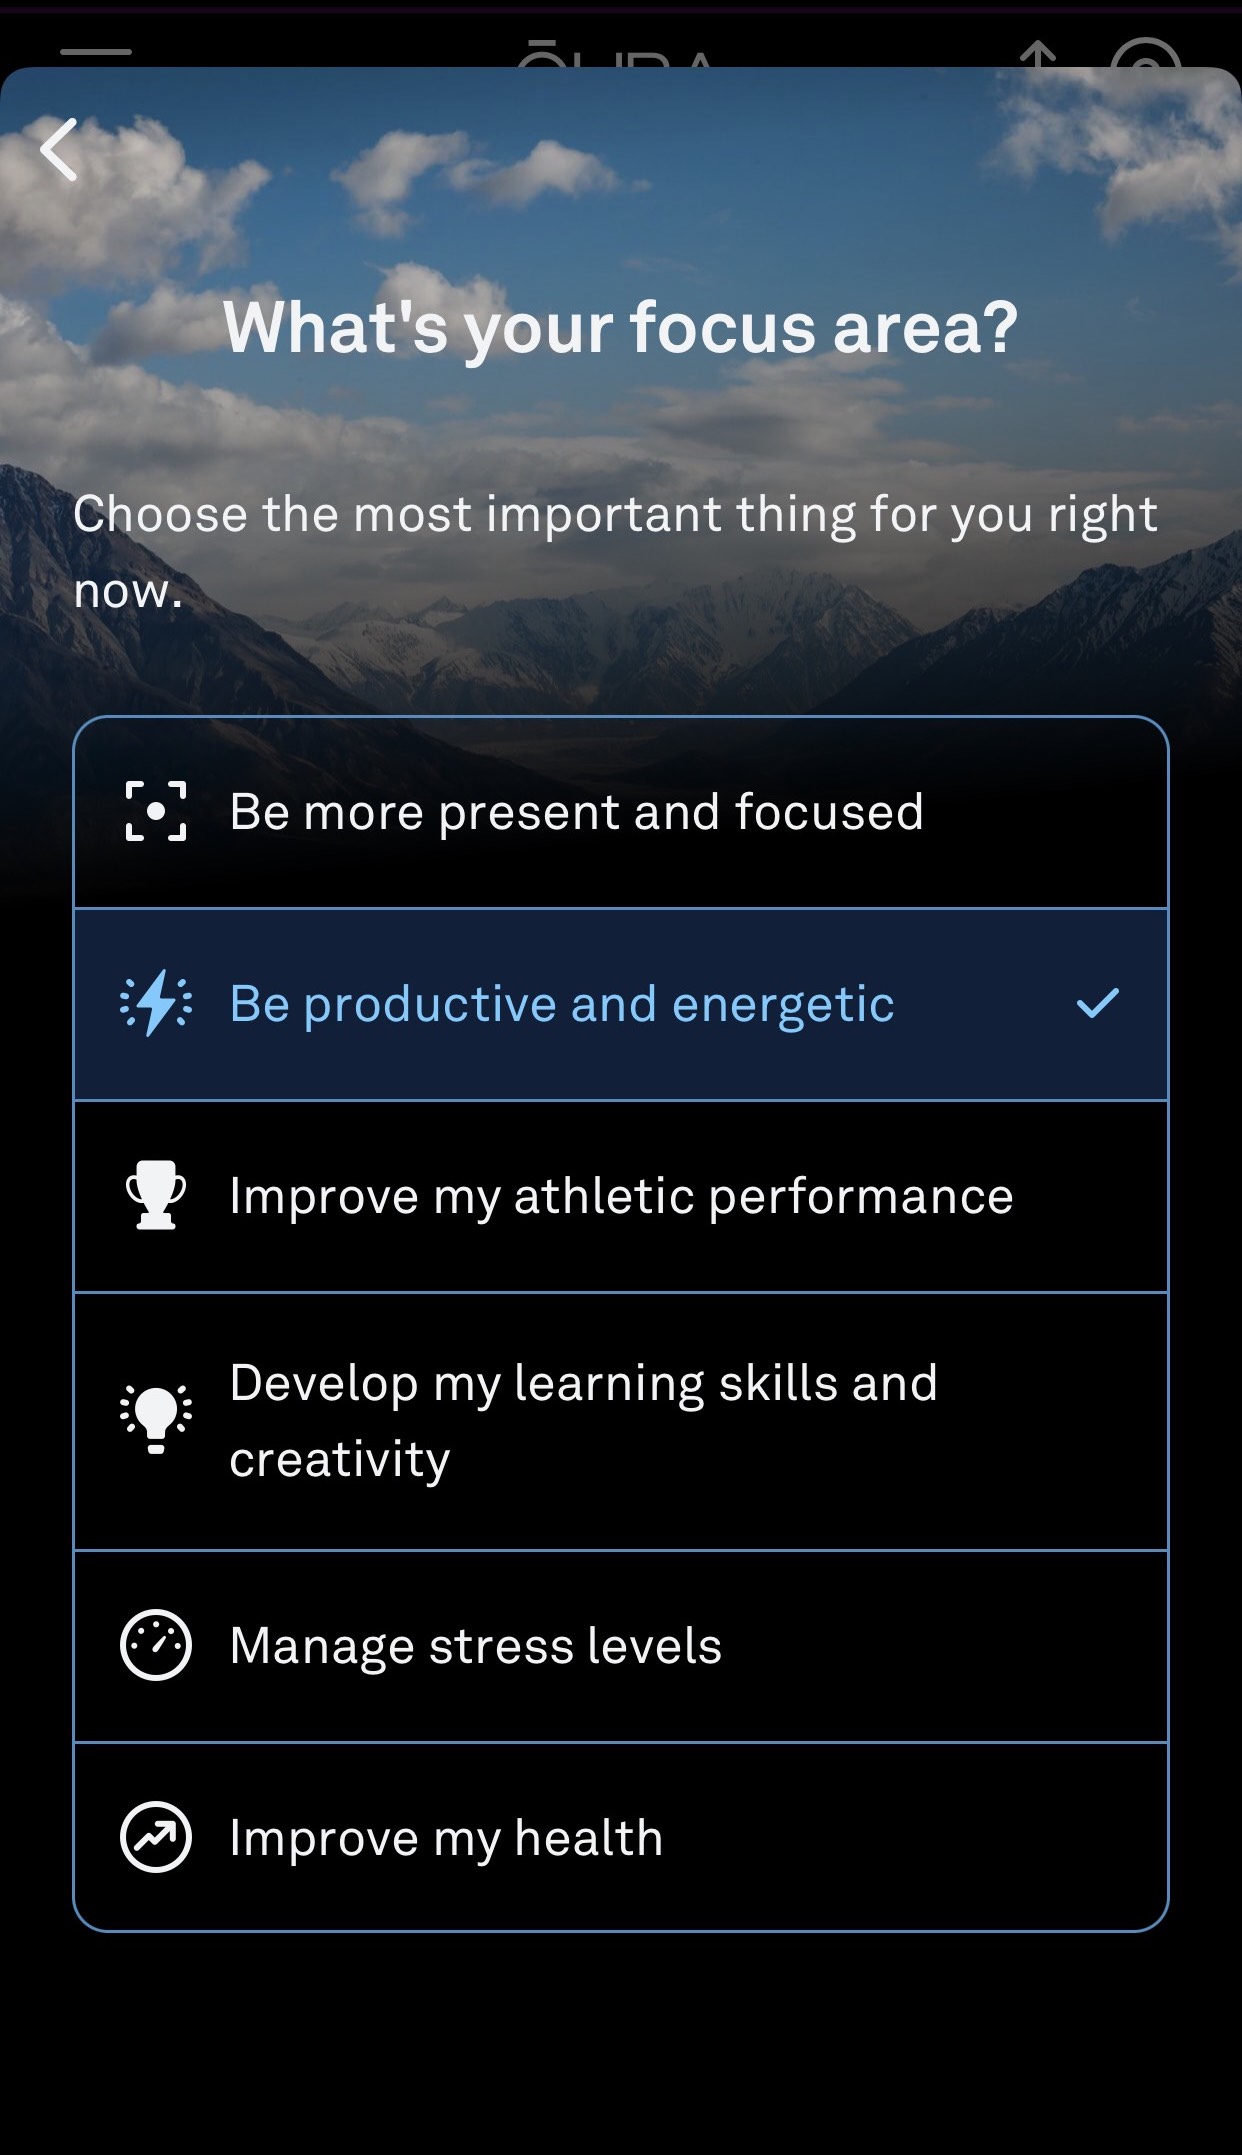 a screenshot of the Oura App. the screen asks what's your focus area, then lists several options